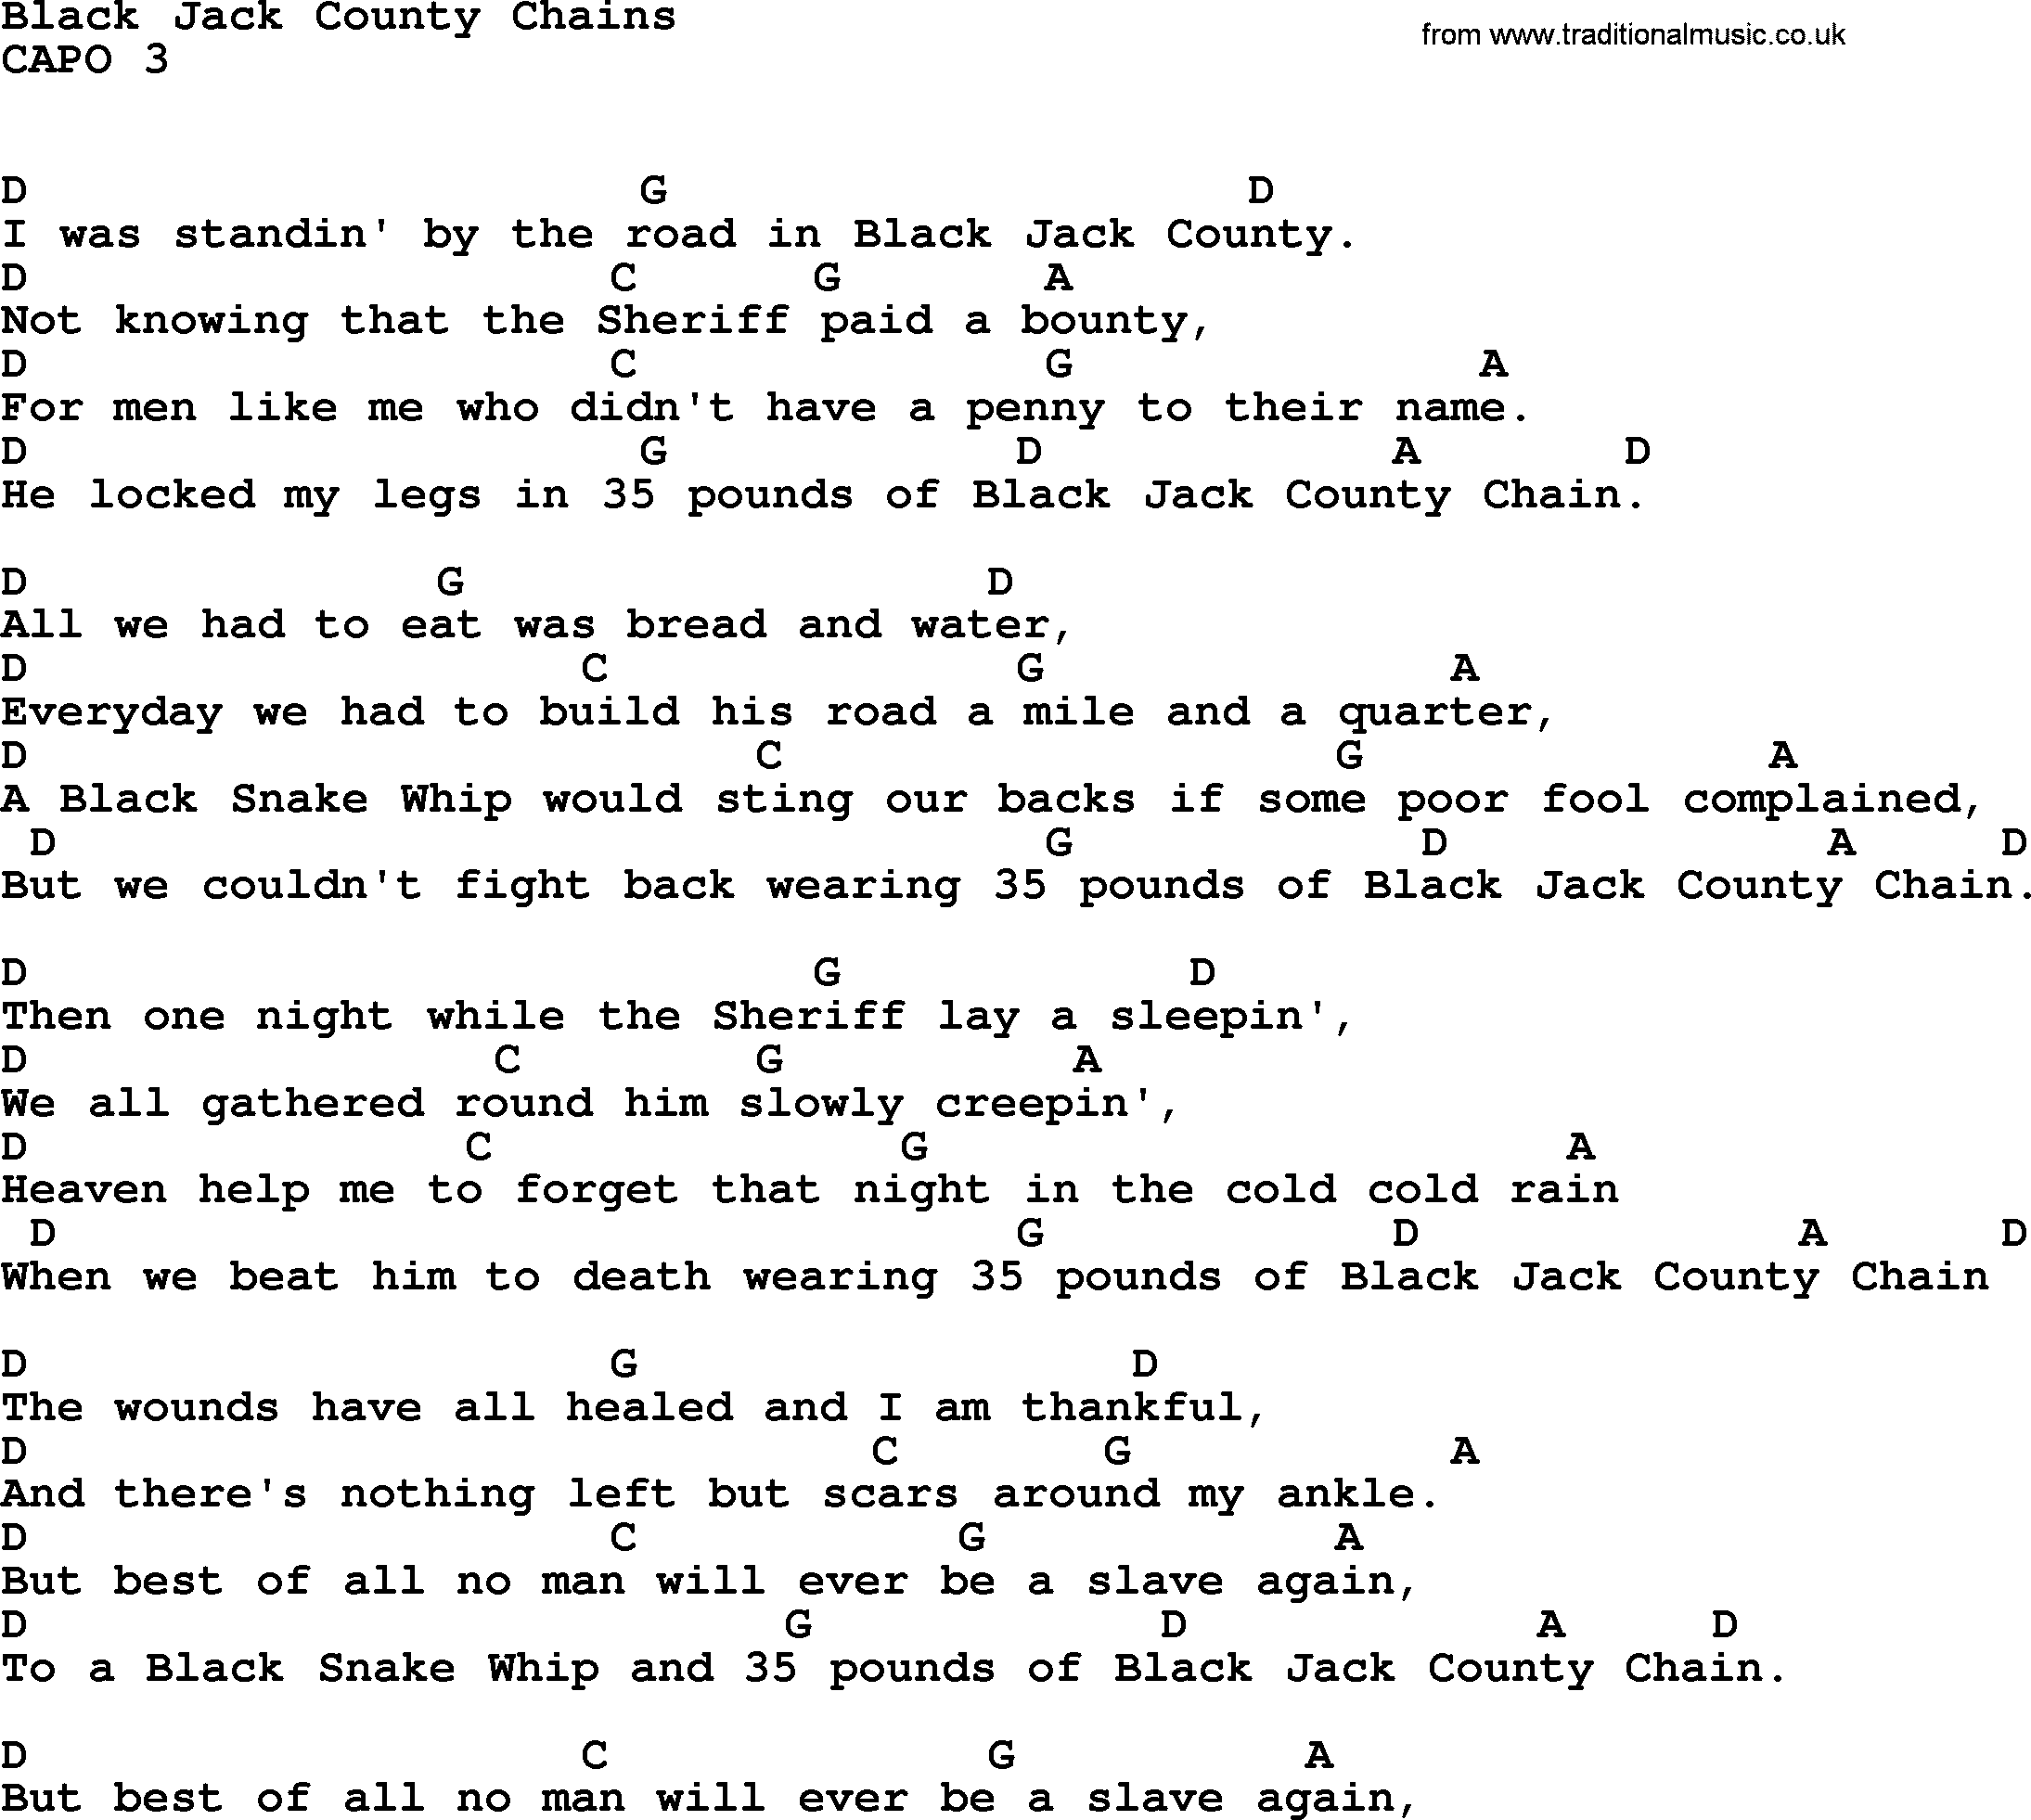 Bluegrass song: Black Jack County Chains, lyrics and chords